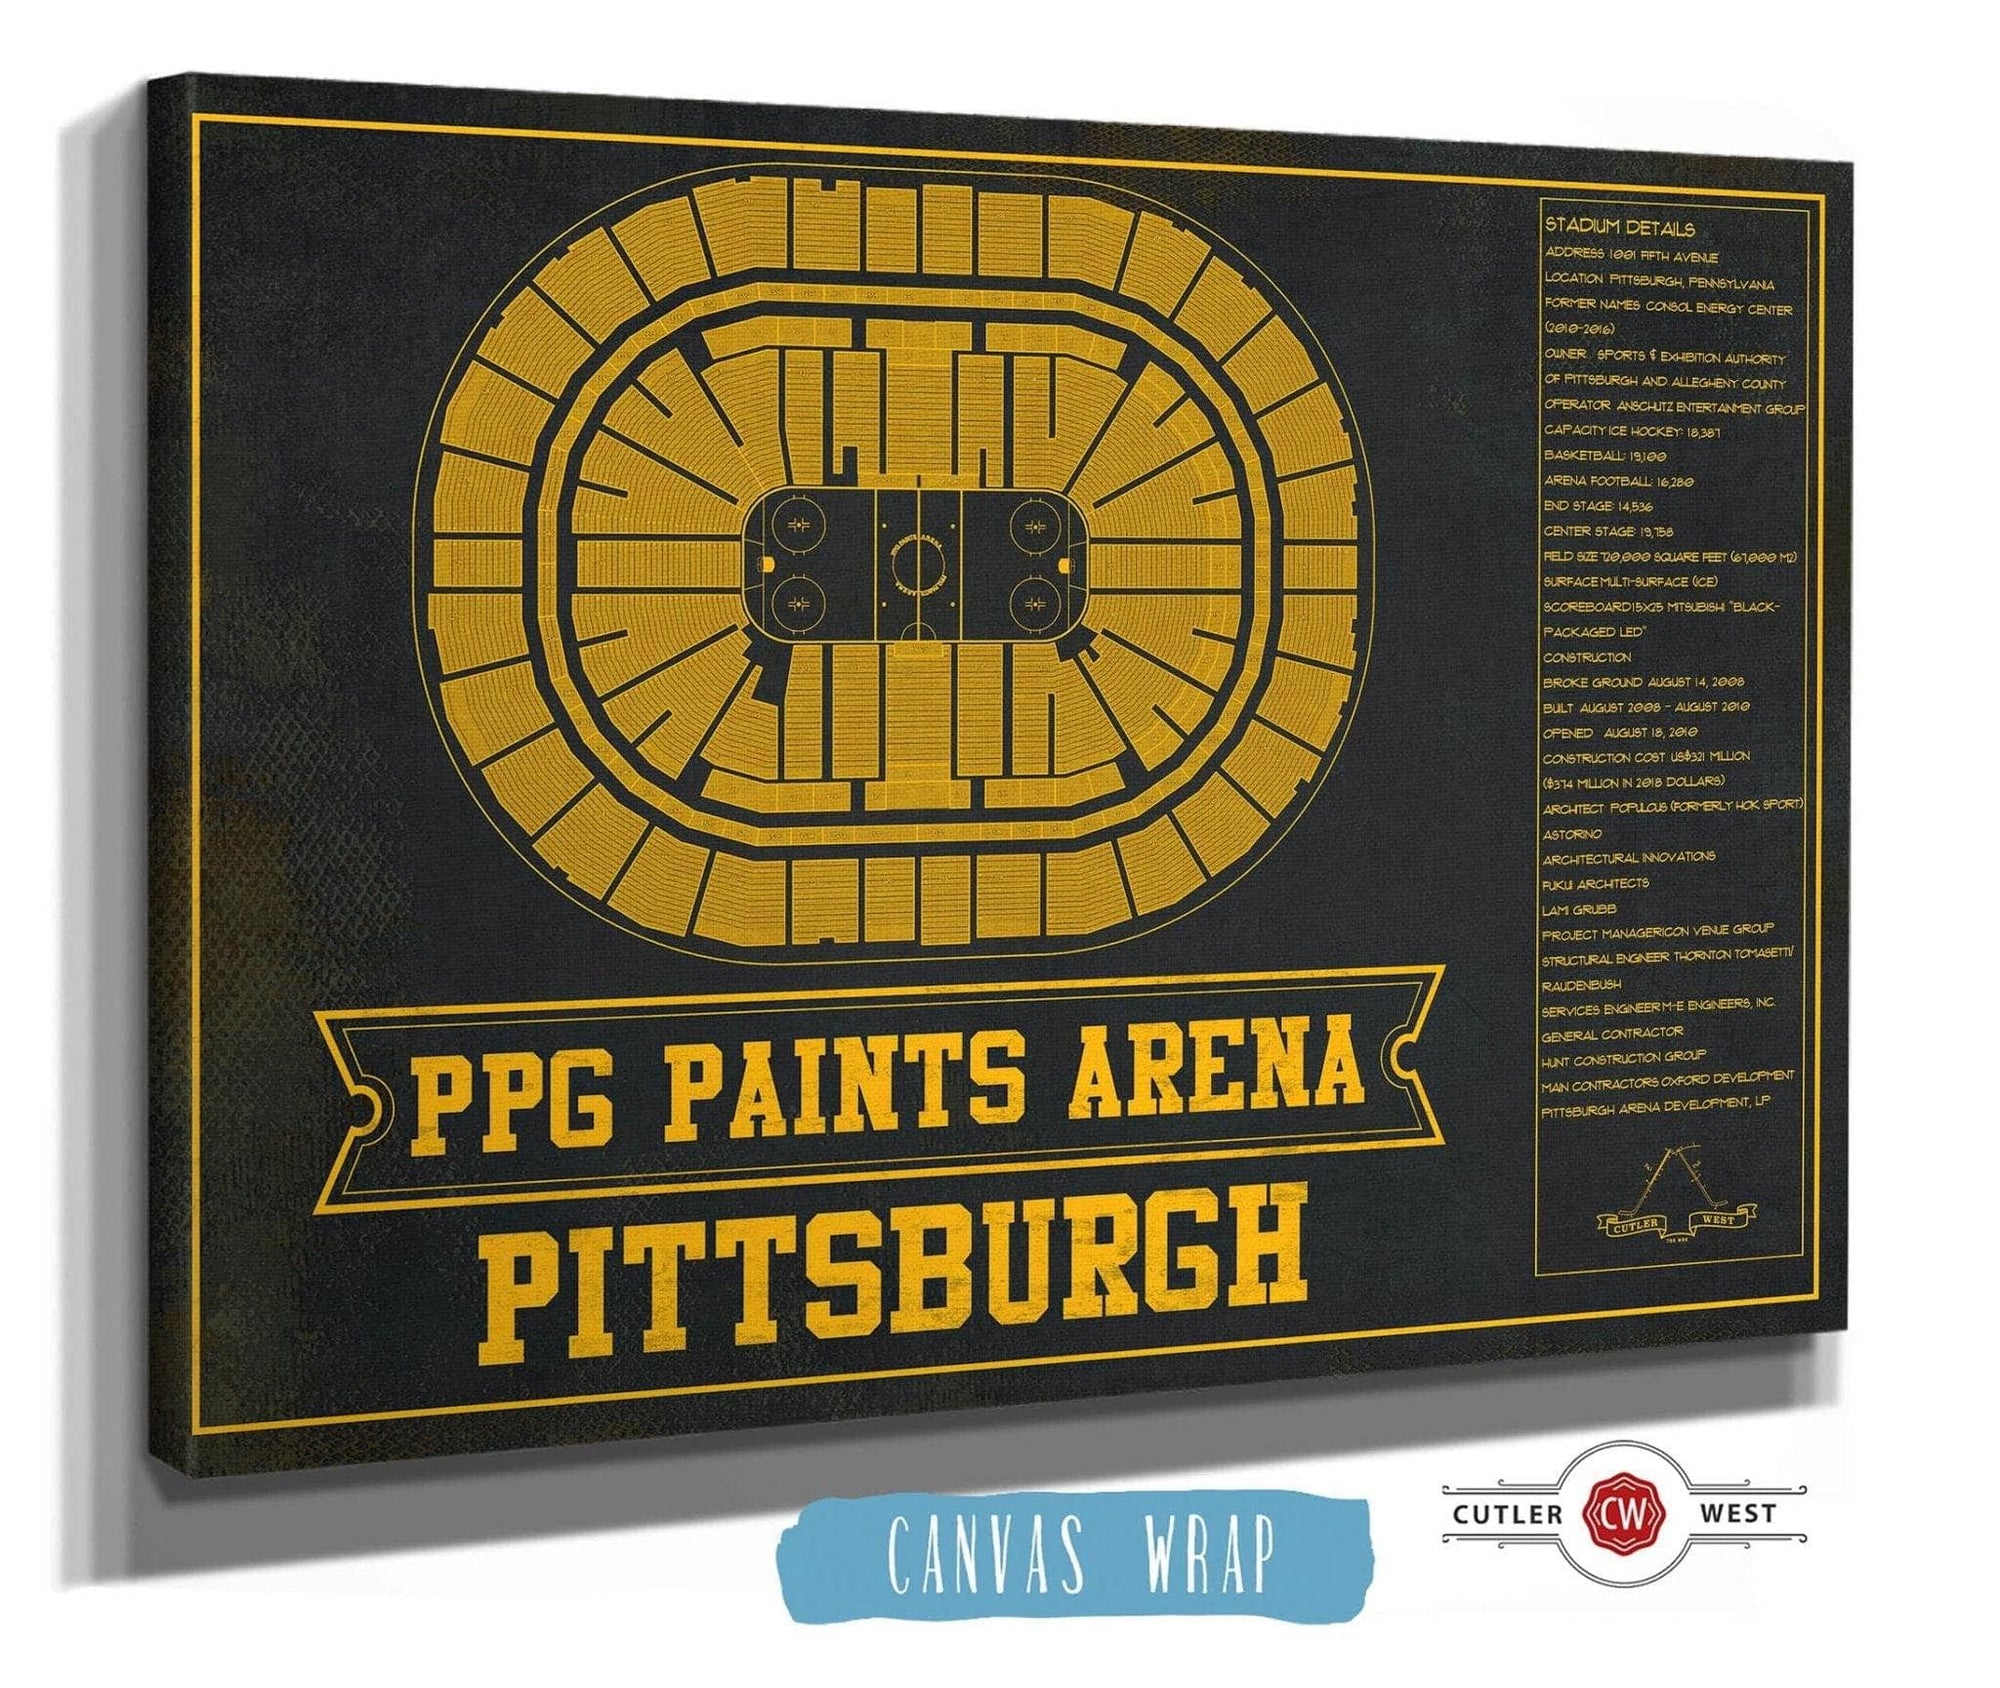 Cutler West 14" x 11" / Stretched Canvas Wrap Pittsburgh Penguins PPG Paints Arena Seating Chart - Vintage Hockey Team Color Print 659983736-TEAM